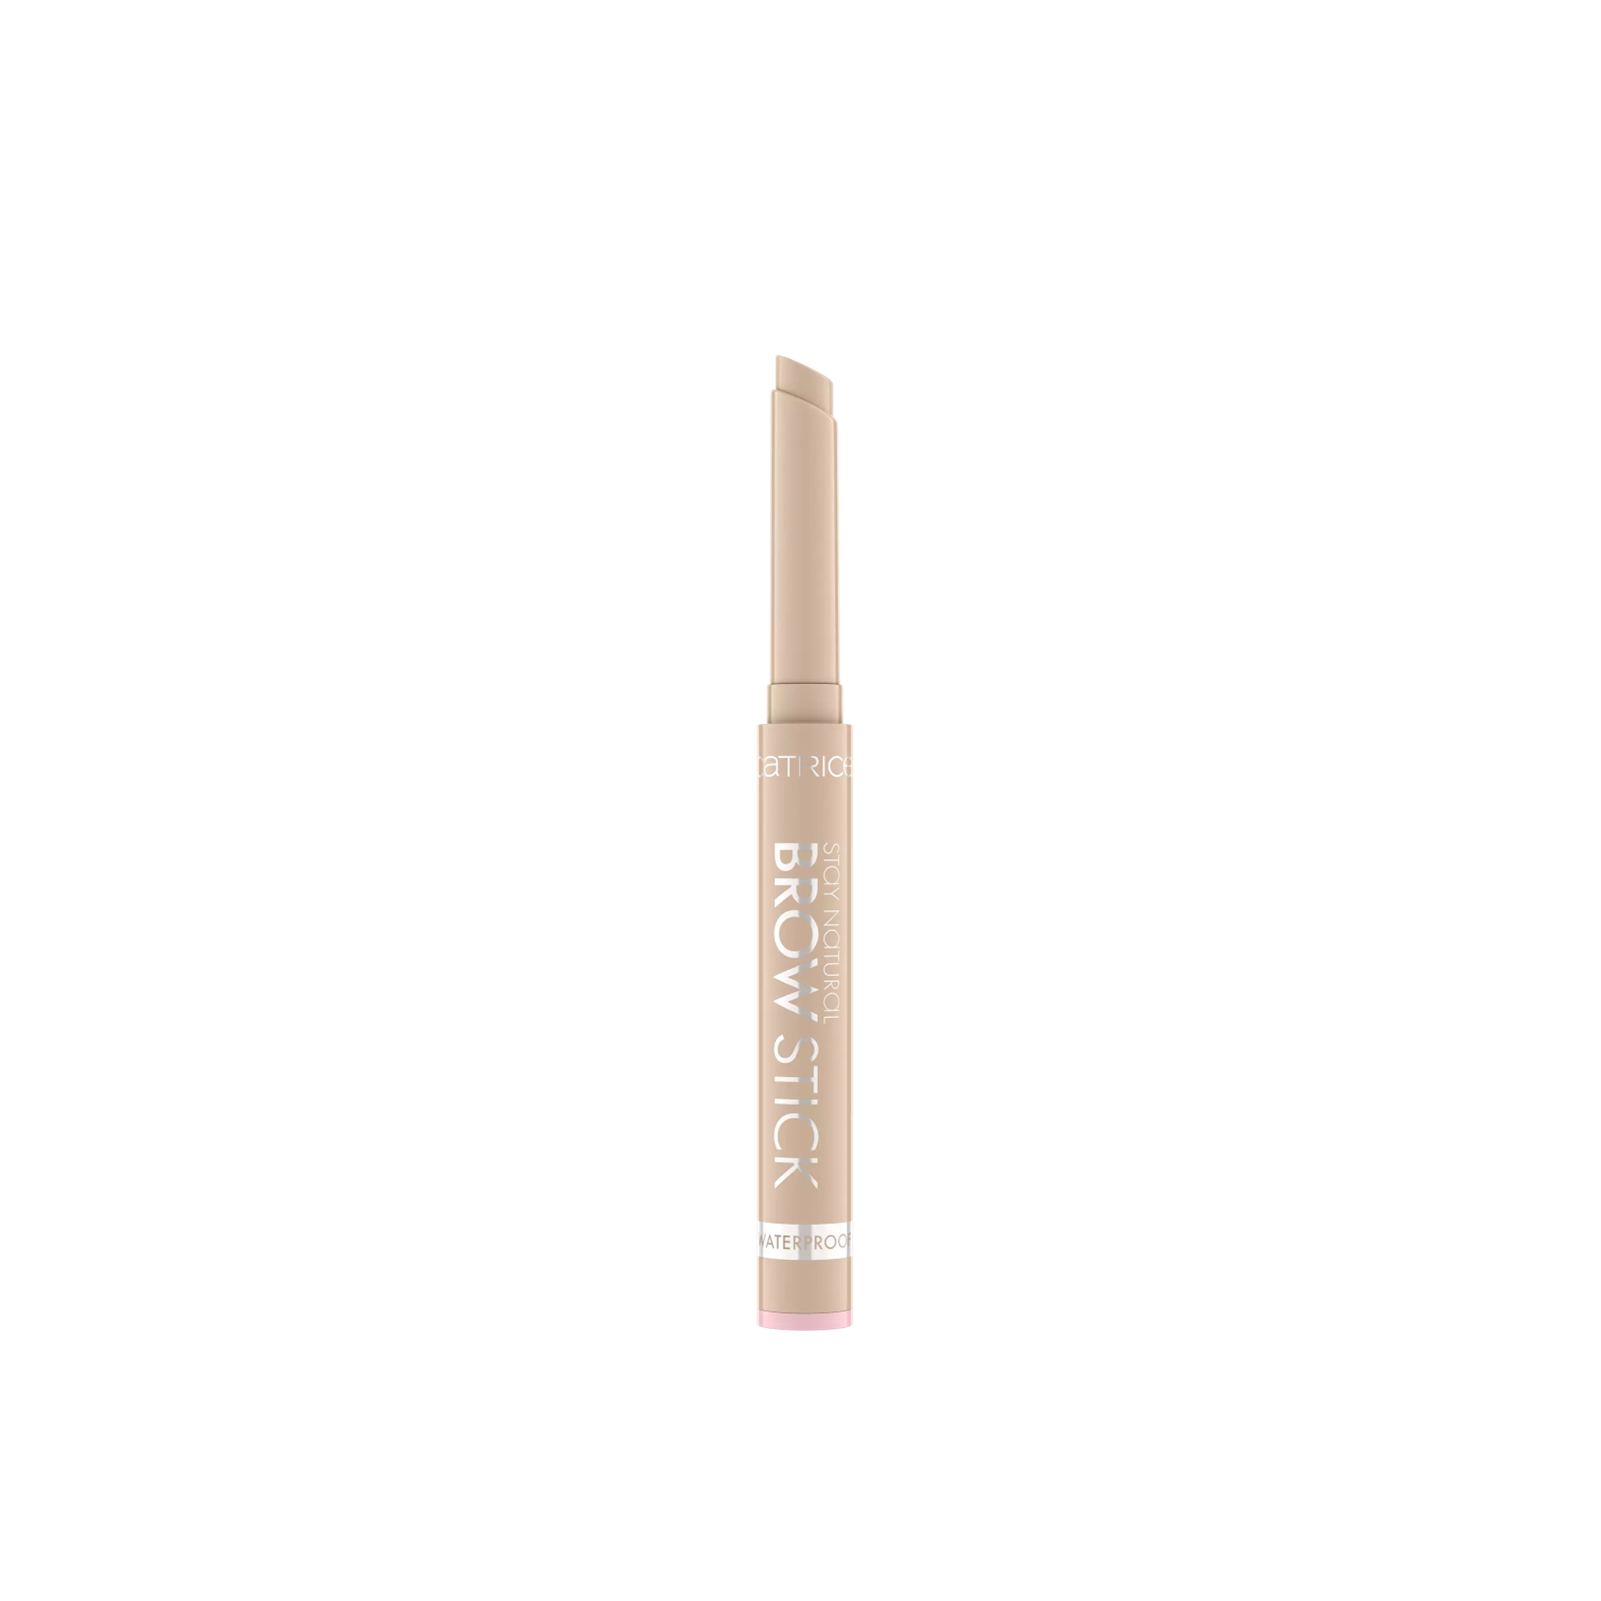 Natural Waterproof Soft oz) Stay Buy 010 USA Brow Stick Blonde · 1g (0.03 Catrice